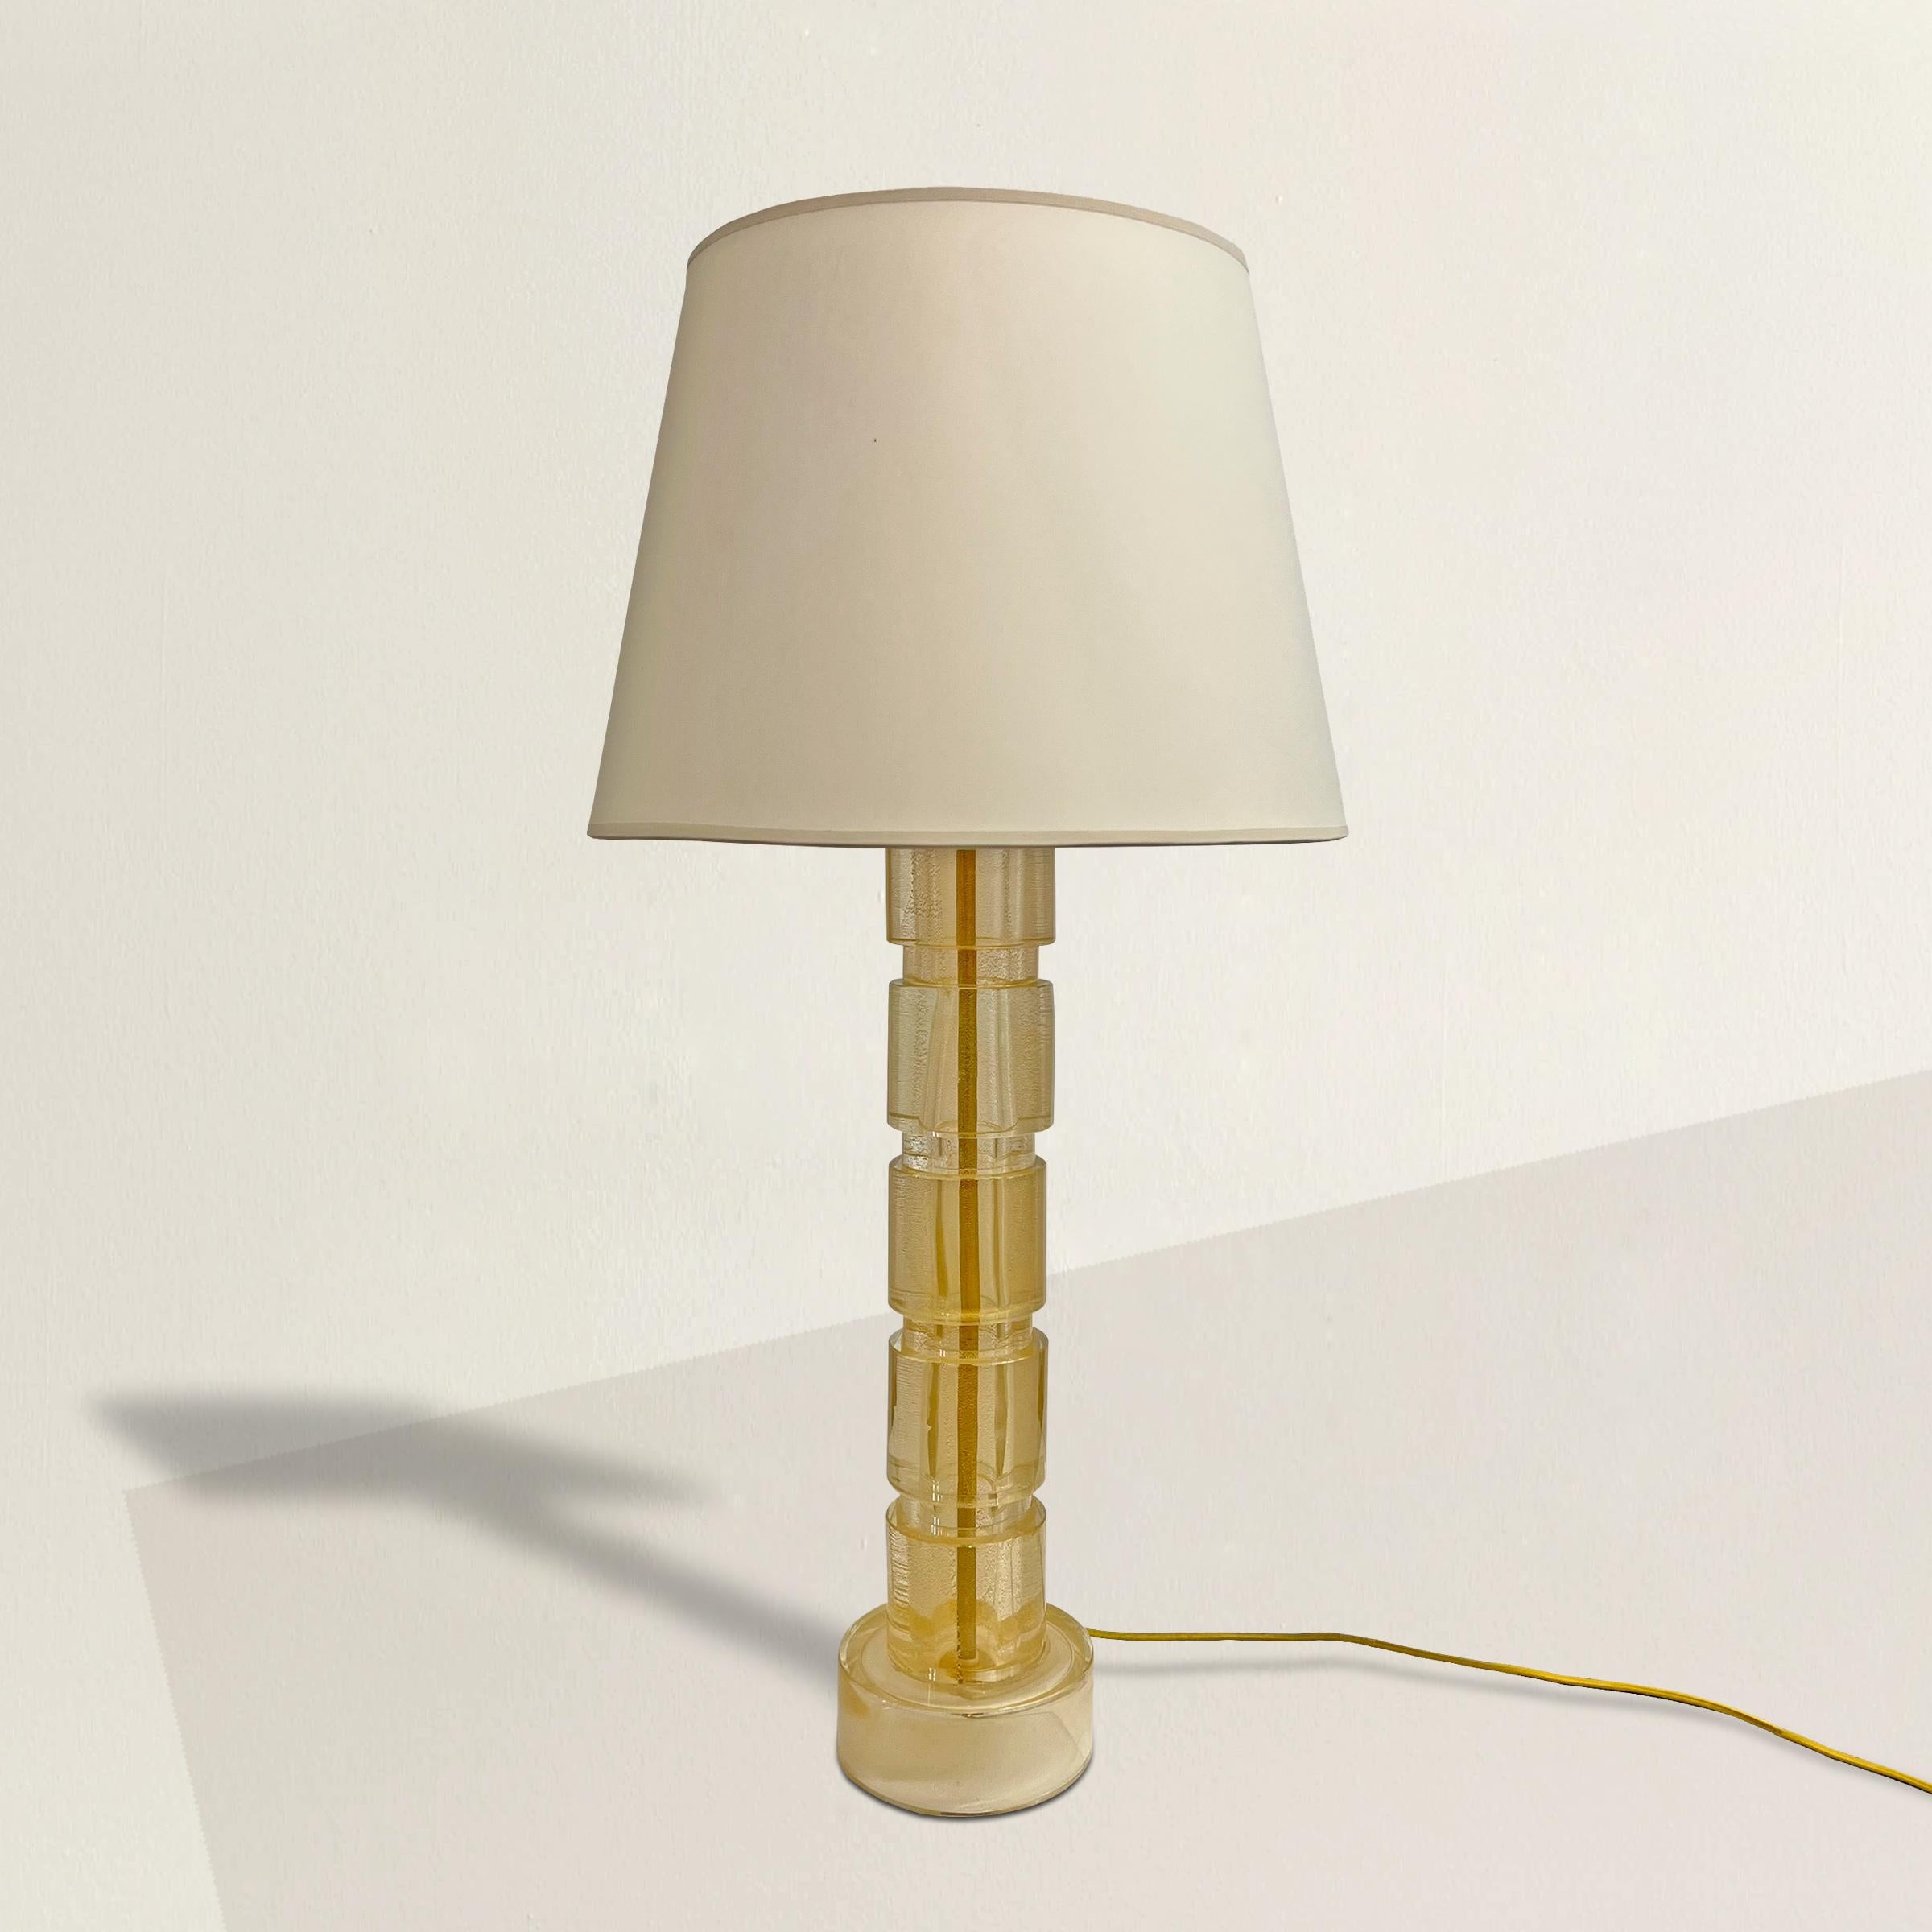 An arresting vintage Italian Murano Avventurina glass table lamp with a chic silhouette, paper shade, and sparkling gold fleck inclusions that catch even the softest light in the room. Avventurina glass is a 17th century Italian glass making